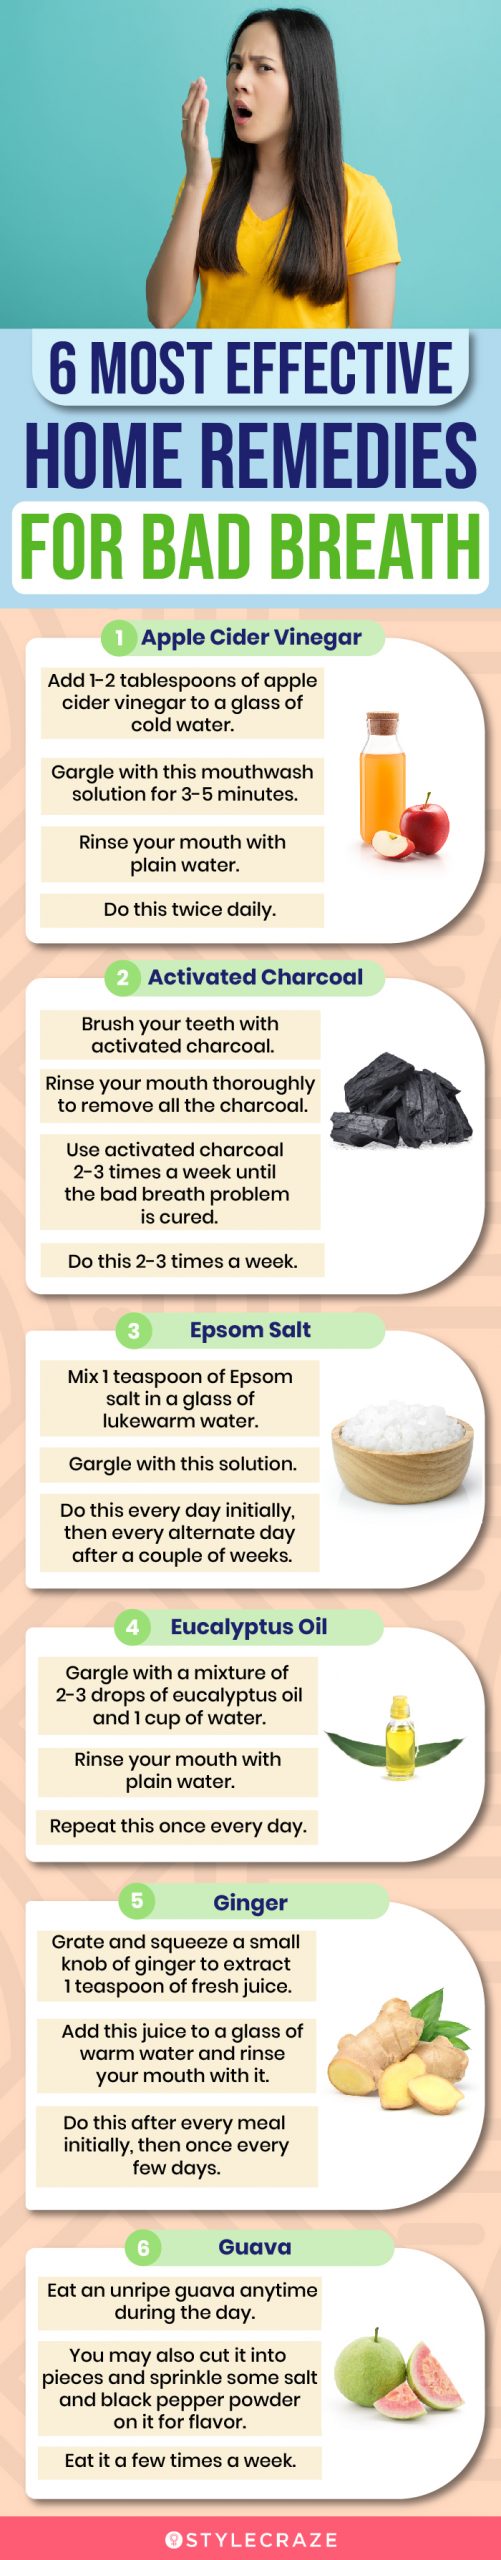 6 most effective home remedies for bad breath (infographic)